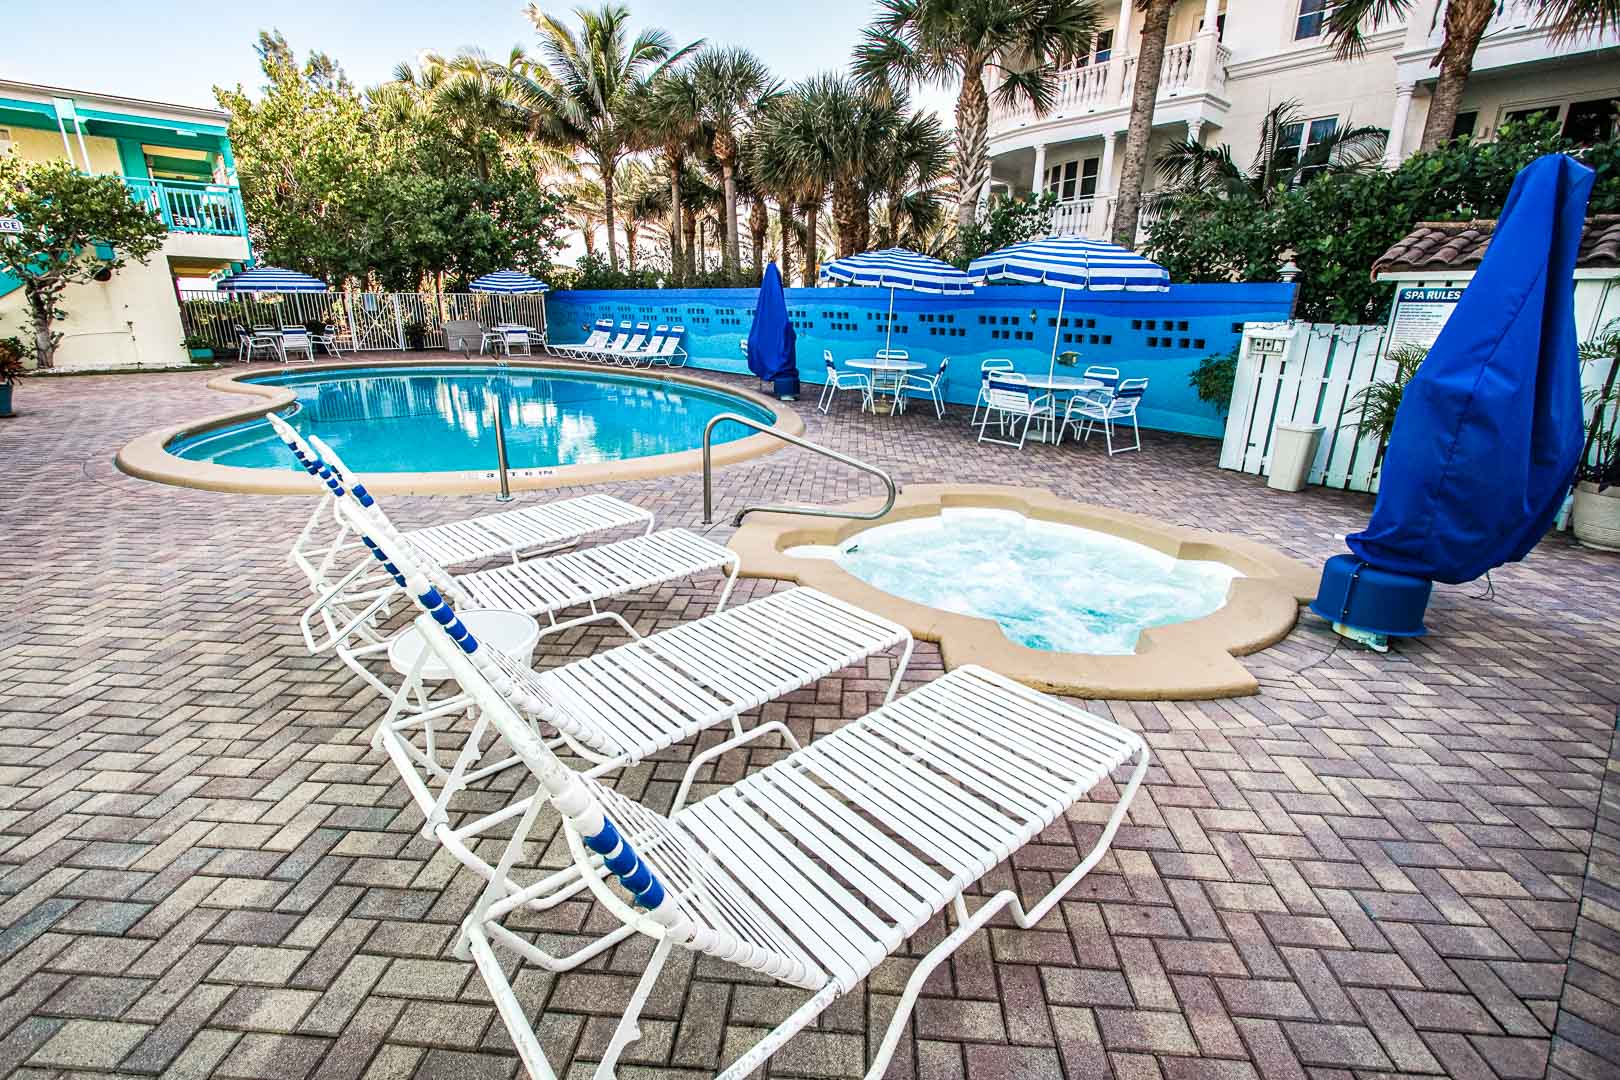 A relaxing outdoor swimming pool at VRI's Sand Dune Shores in Florida.